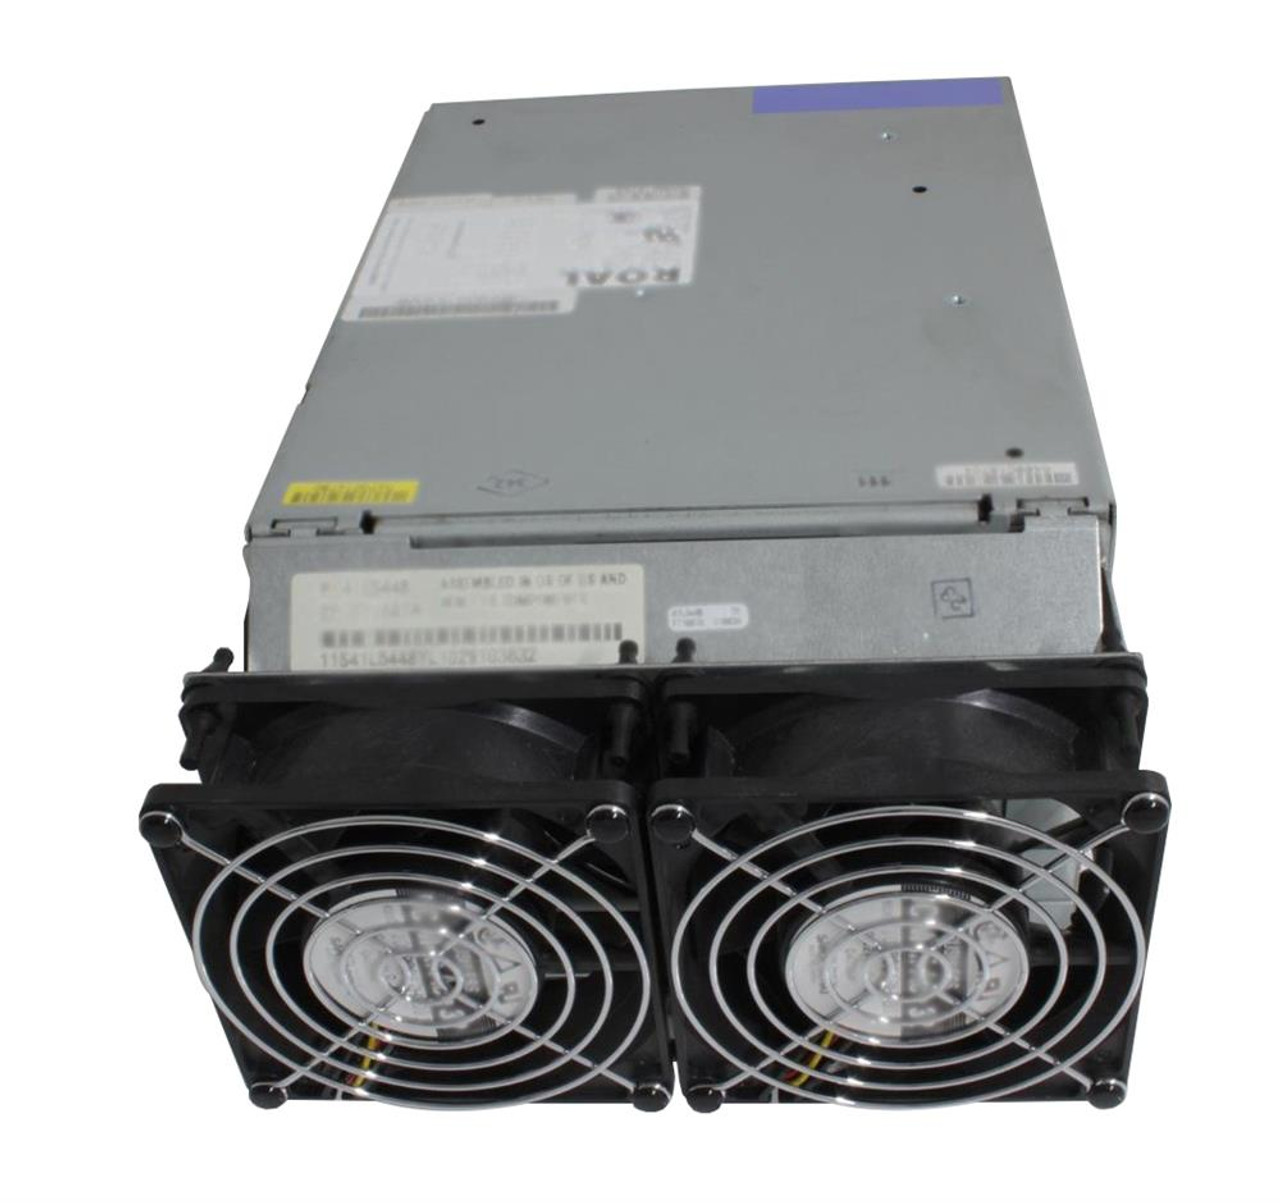 00G2960 IBM 75-Watts Power Supply for RS6000 Server